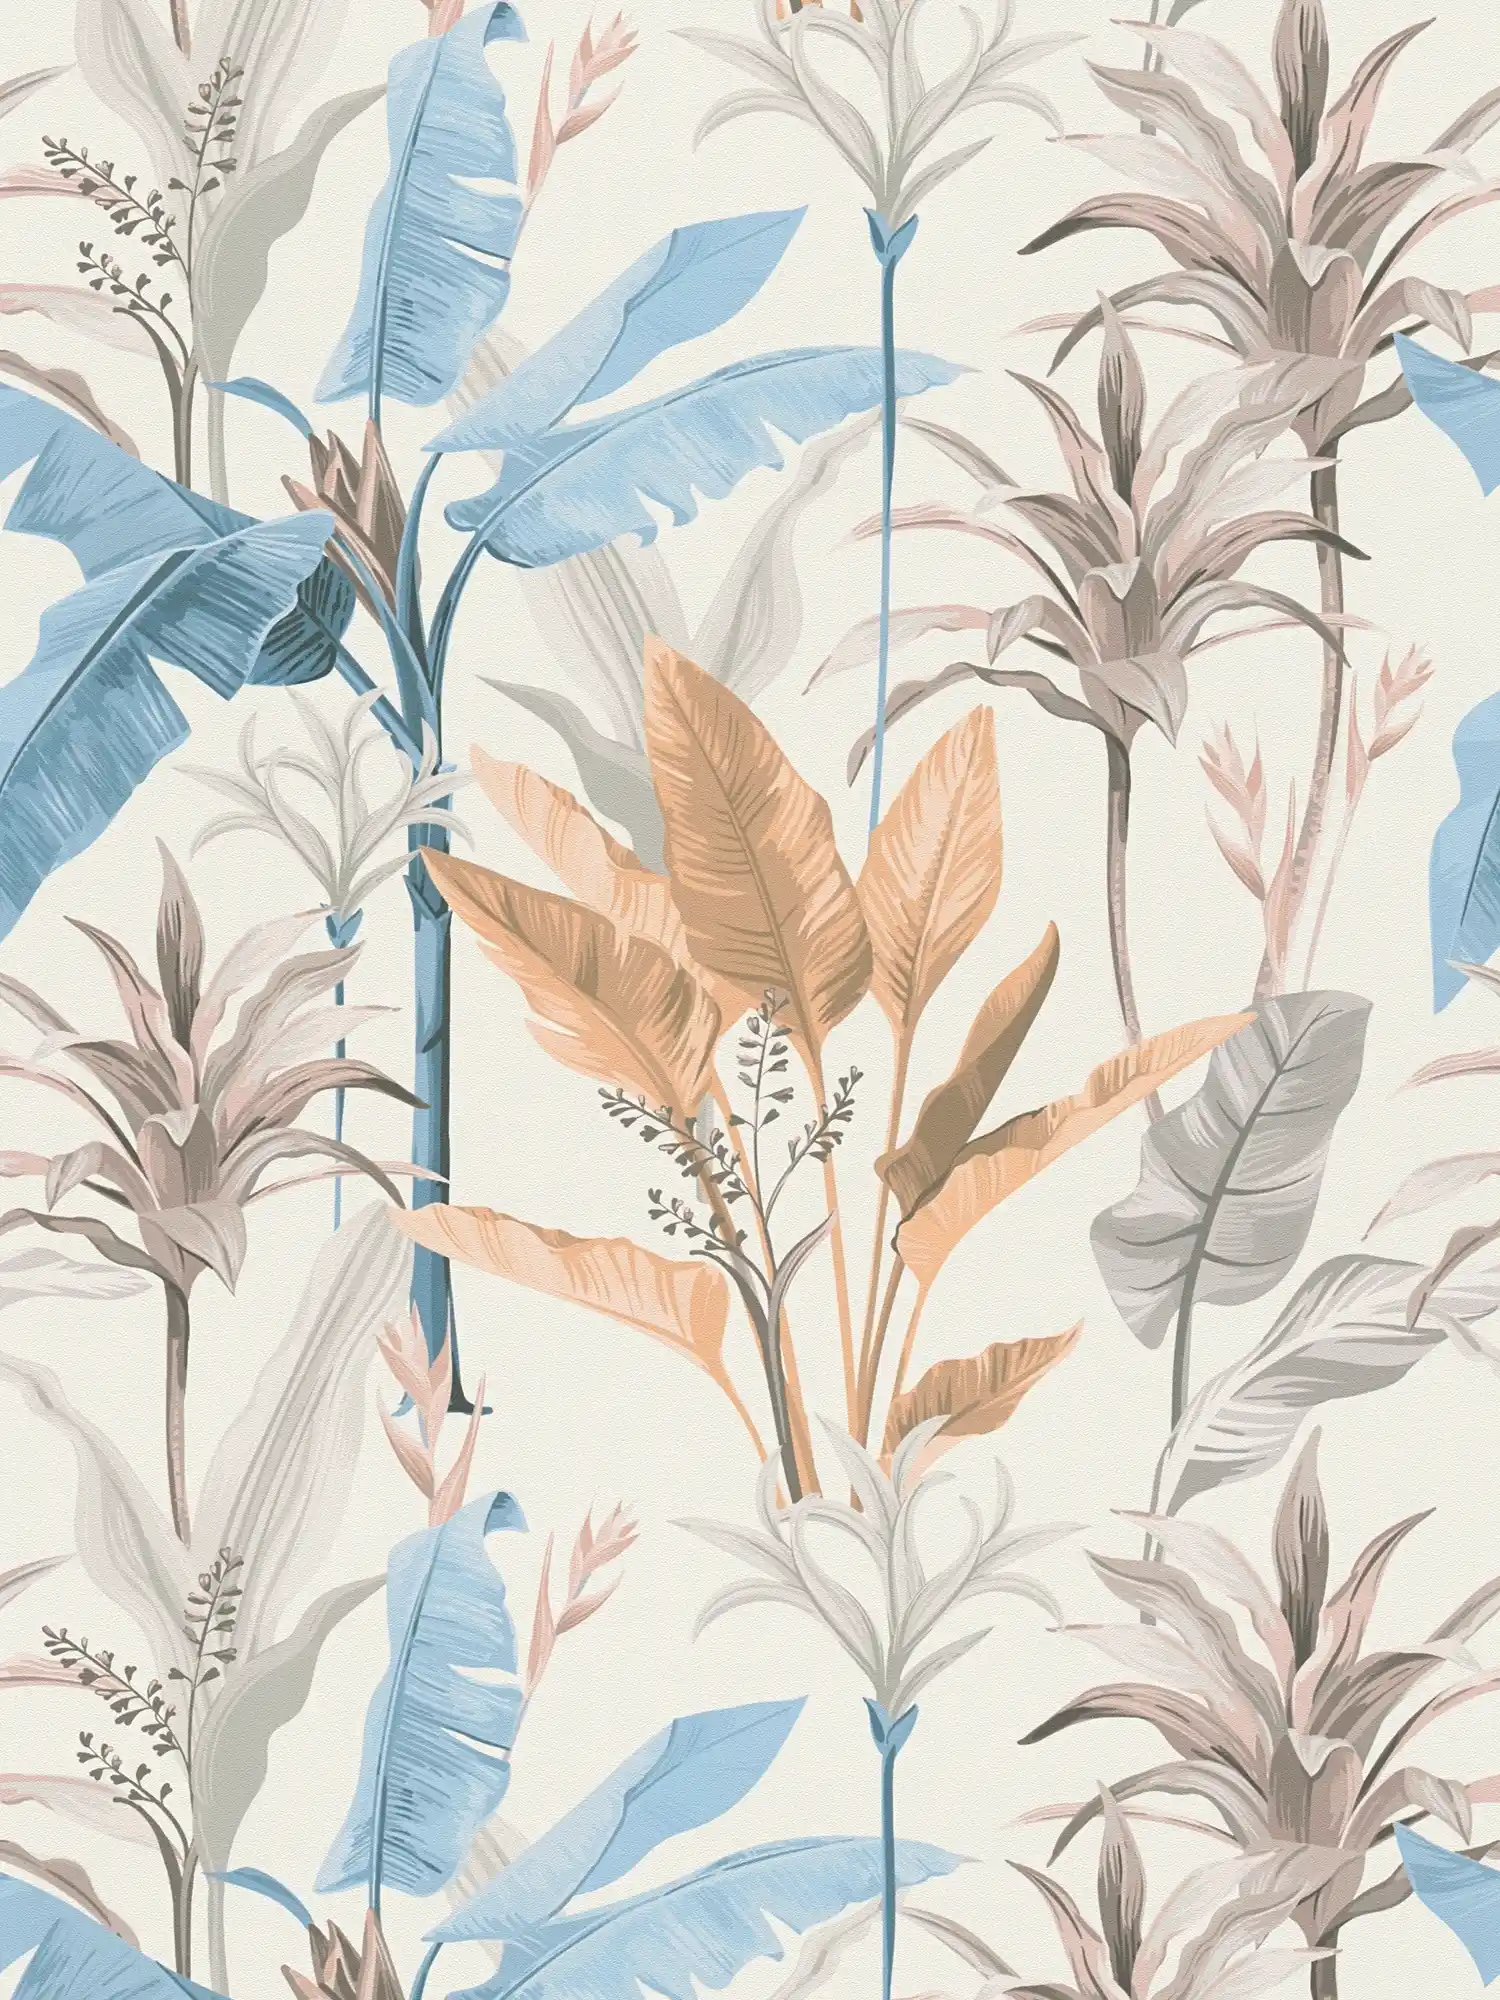 Detailed floral non-woven wallpaper with leaves pattern - blue, grey, cream
